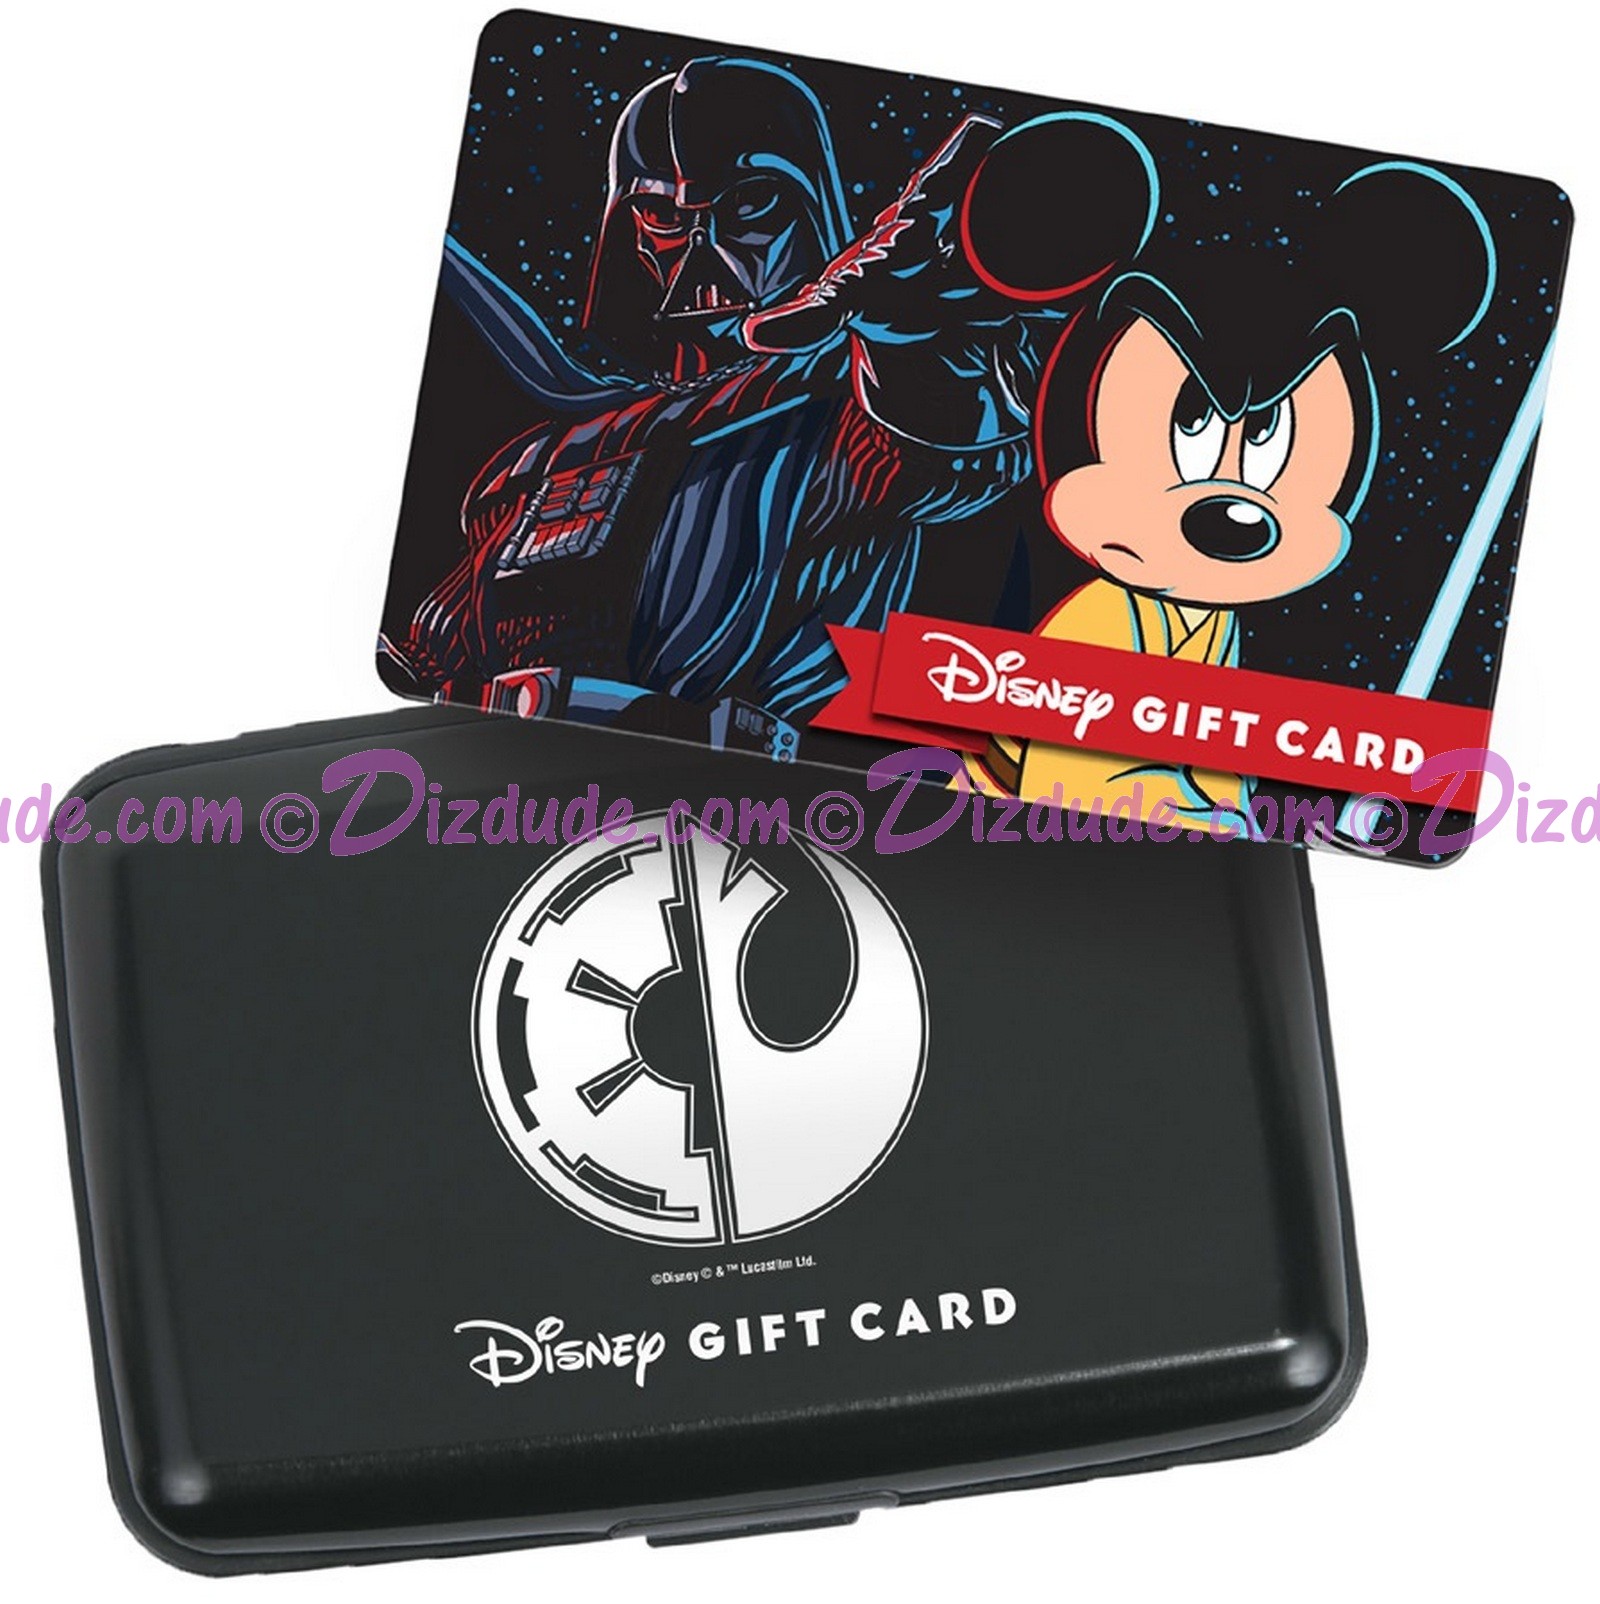 Star Wars Galactic Gathering Gift Card with Case Limited Edition ~ Disney Galactic Gathering Star Wars Weekends 2015 Event © Dizdude.com